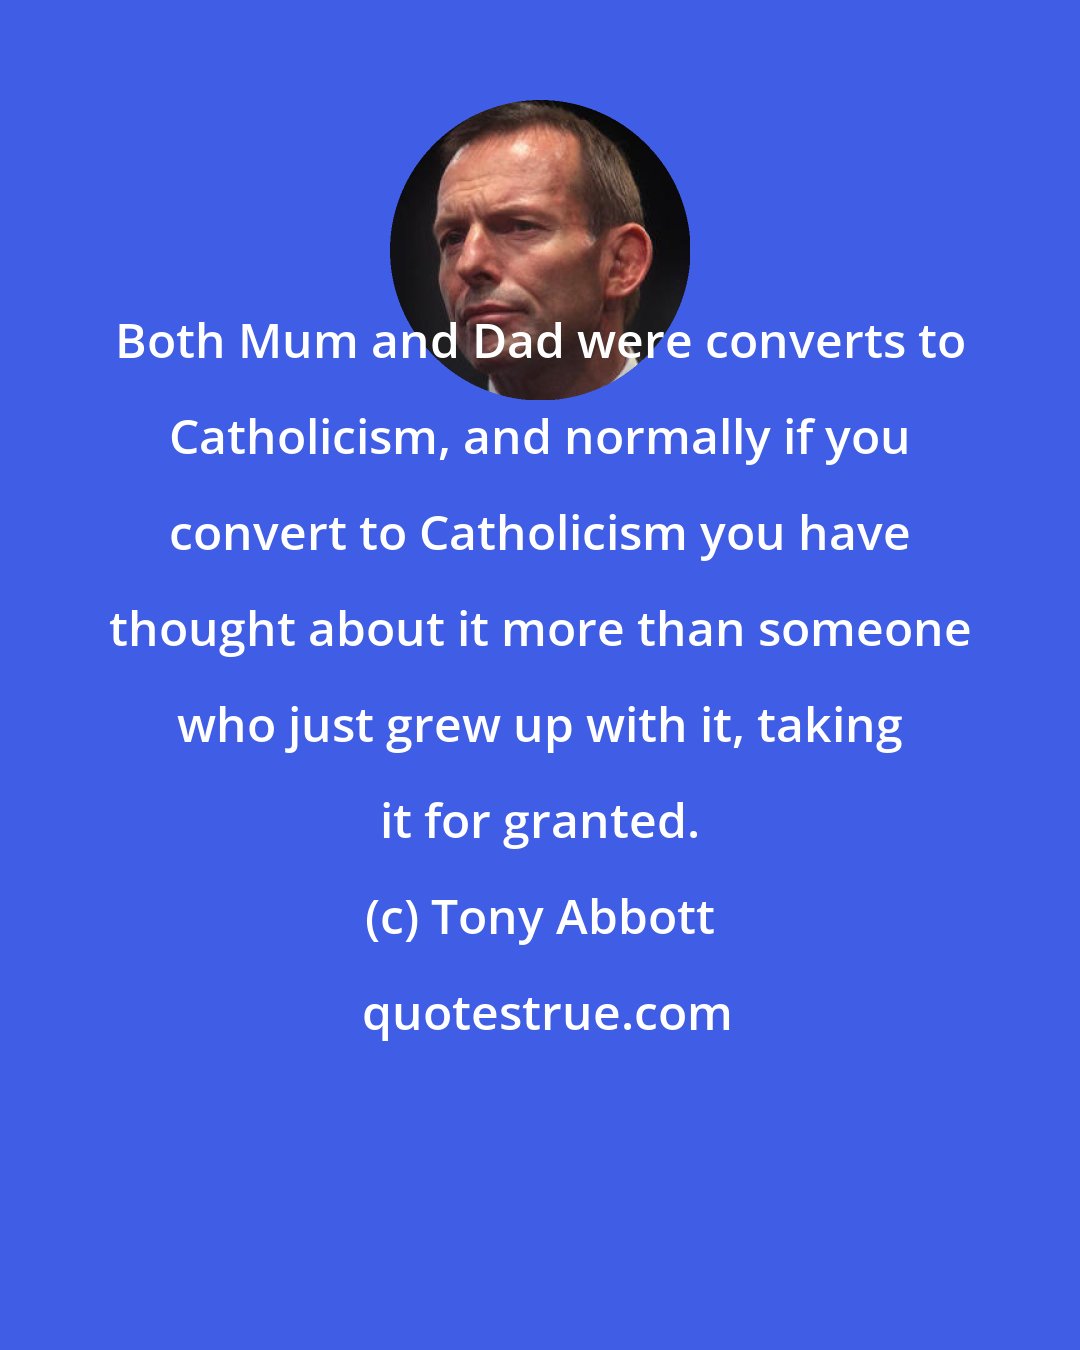 Tony Abbott: Both Mum and Dad were converts to Catholicism, and normally if you convert to Catholicism you have thought about it more than someone who just grew up with it, taking it for granted.